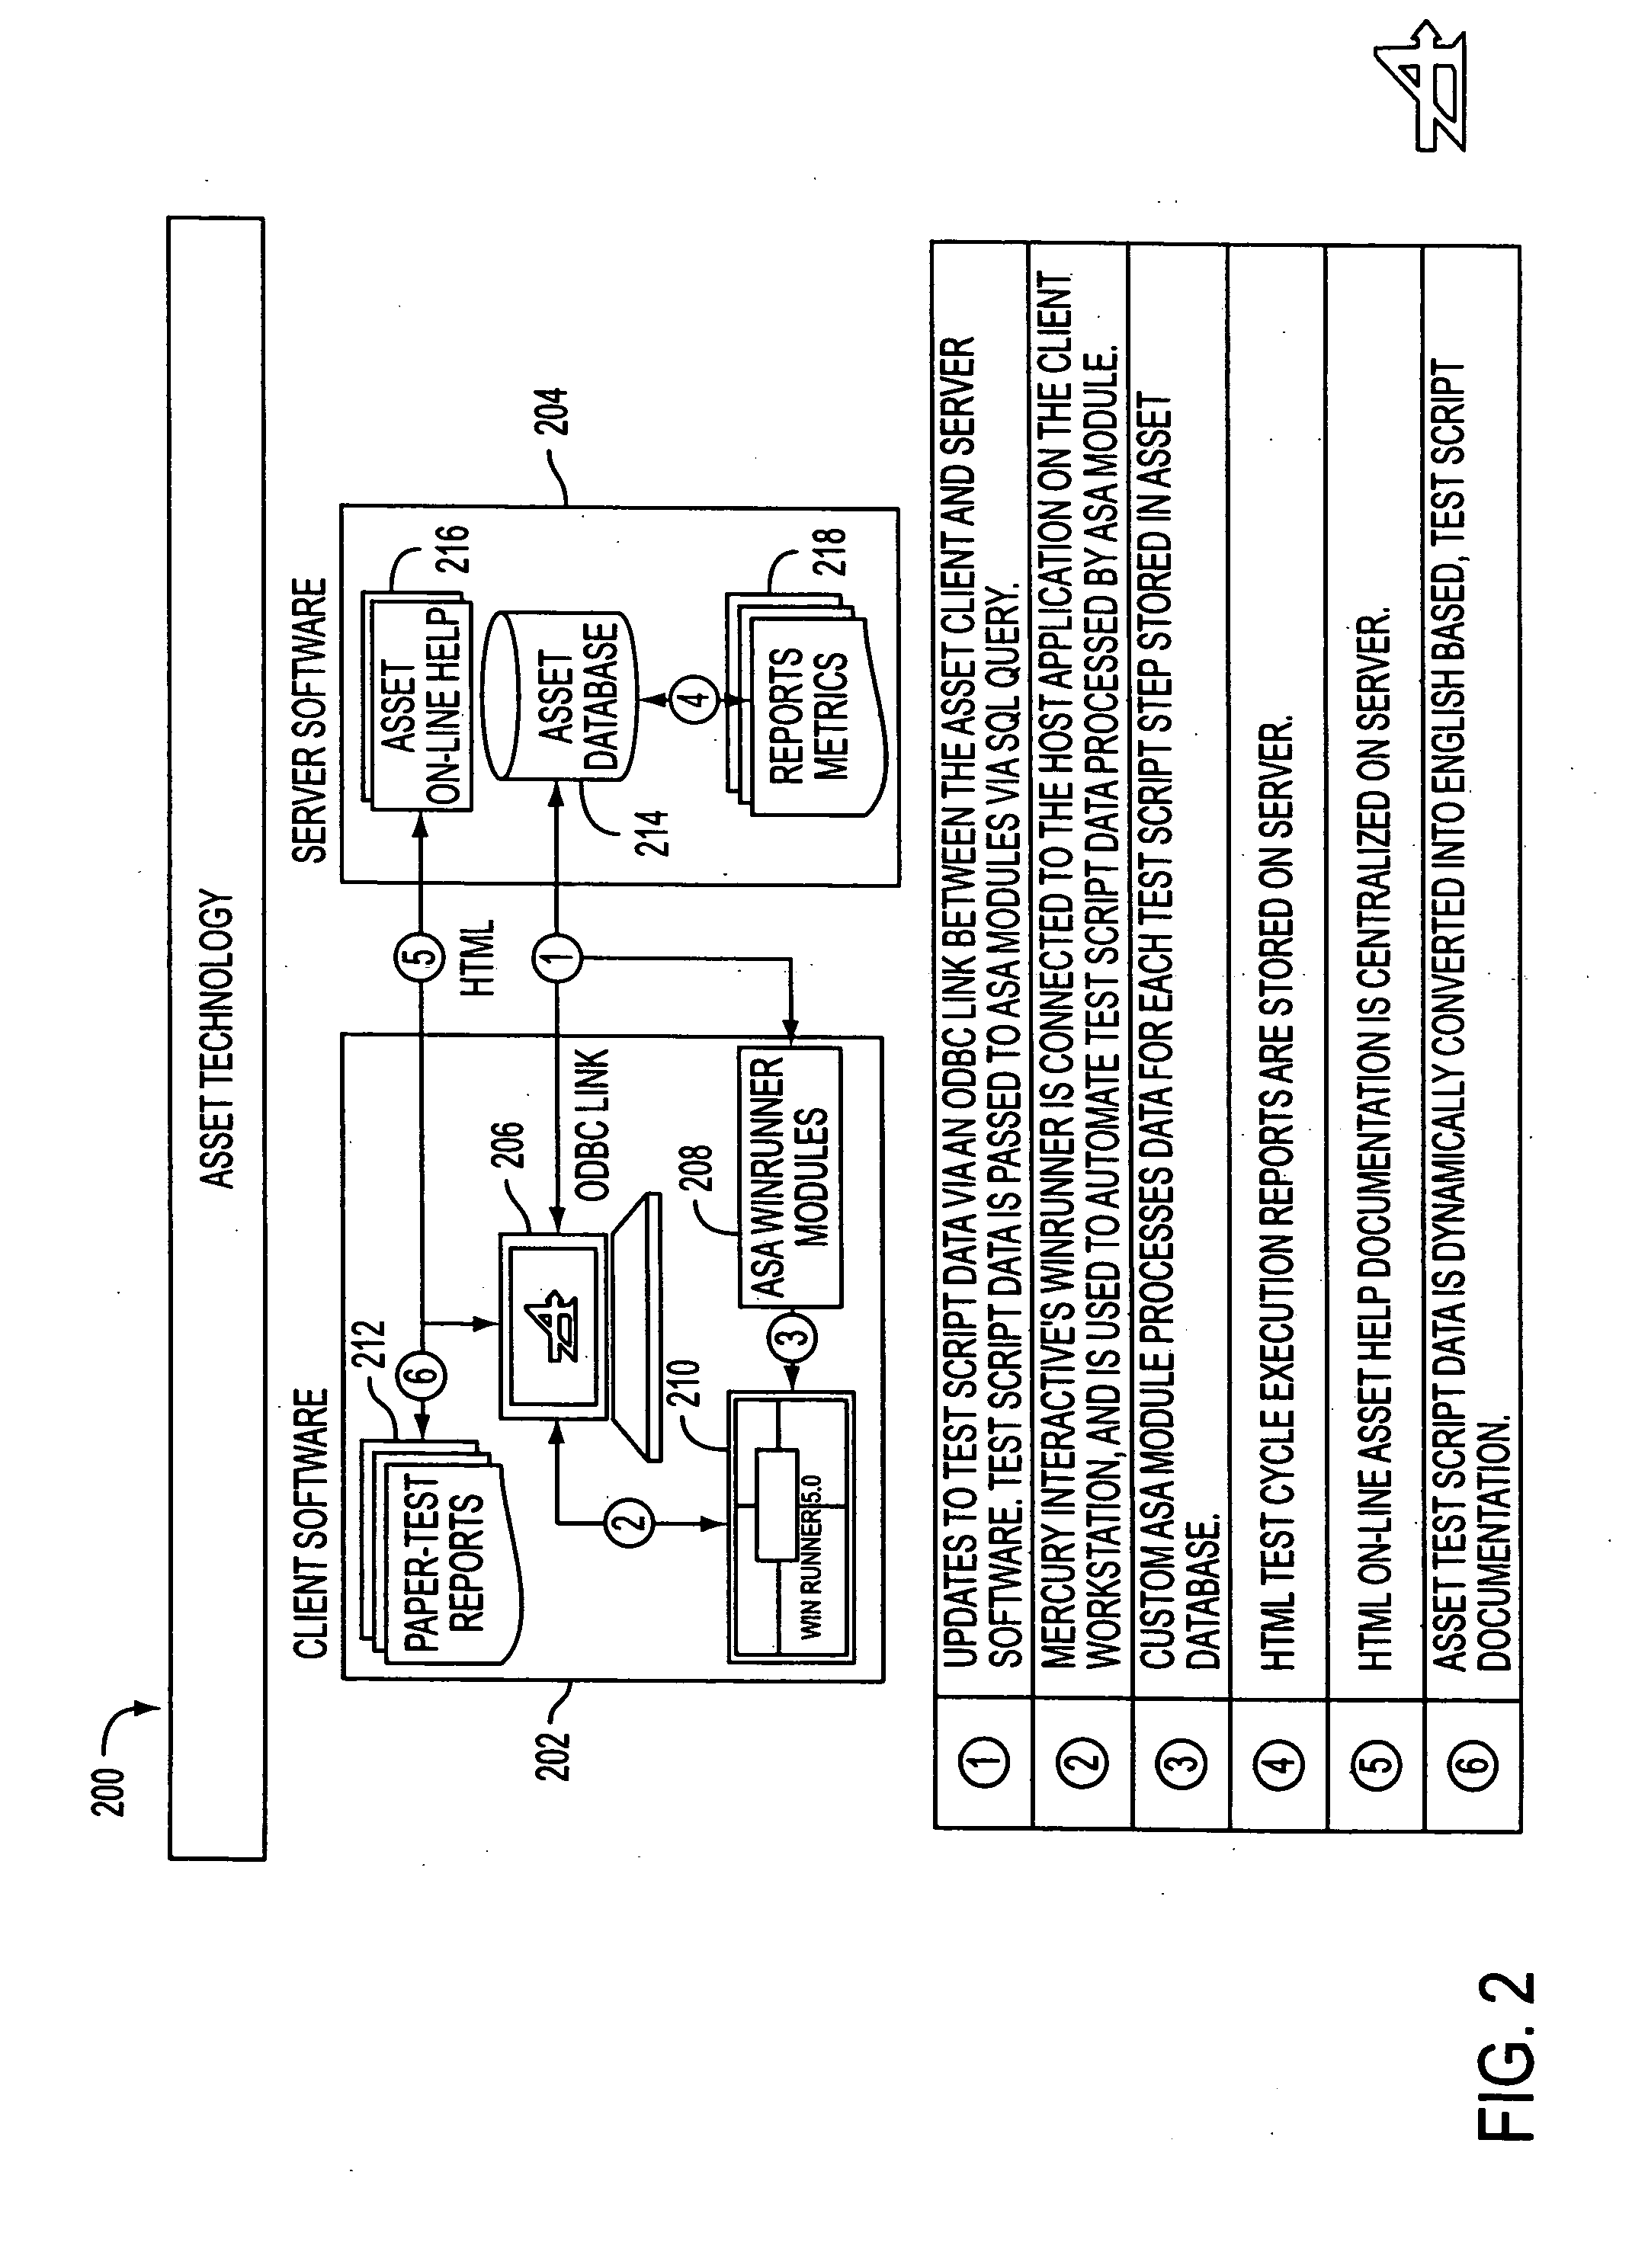 System, method, and article of manufacture for synchronization in an automated scripting framework